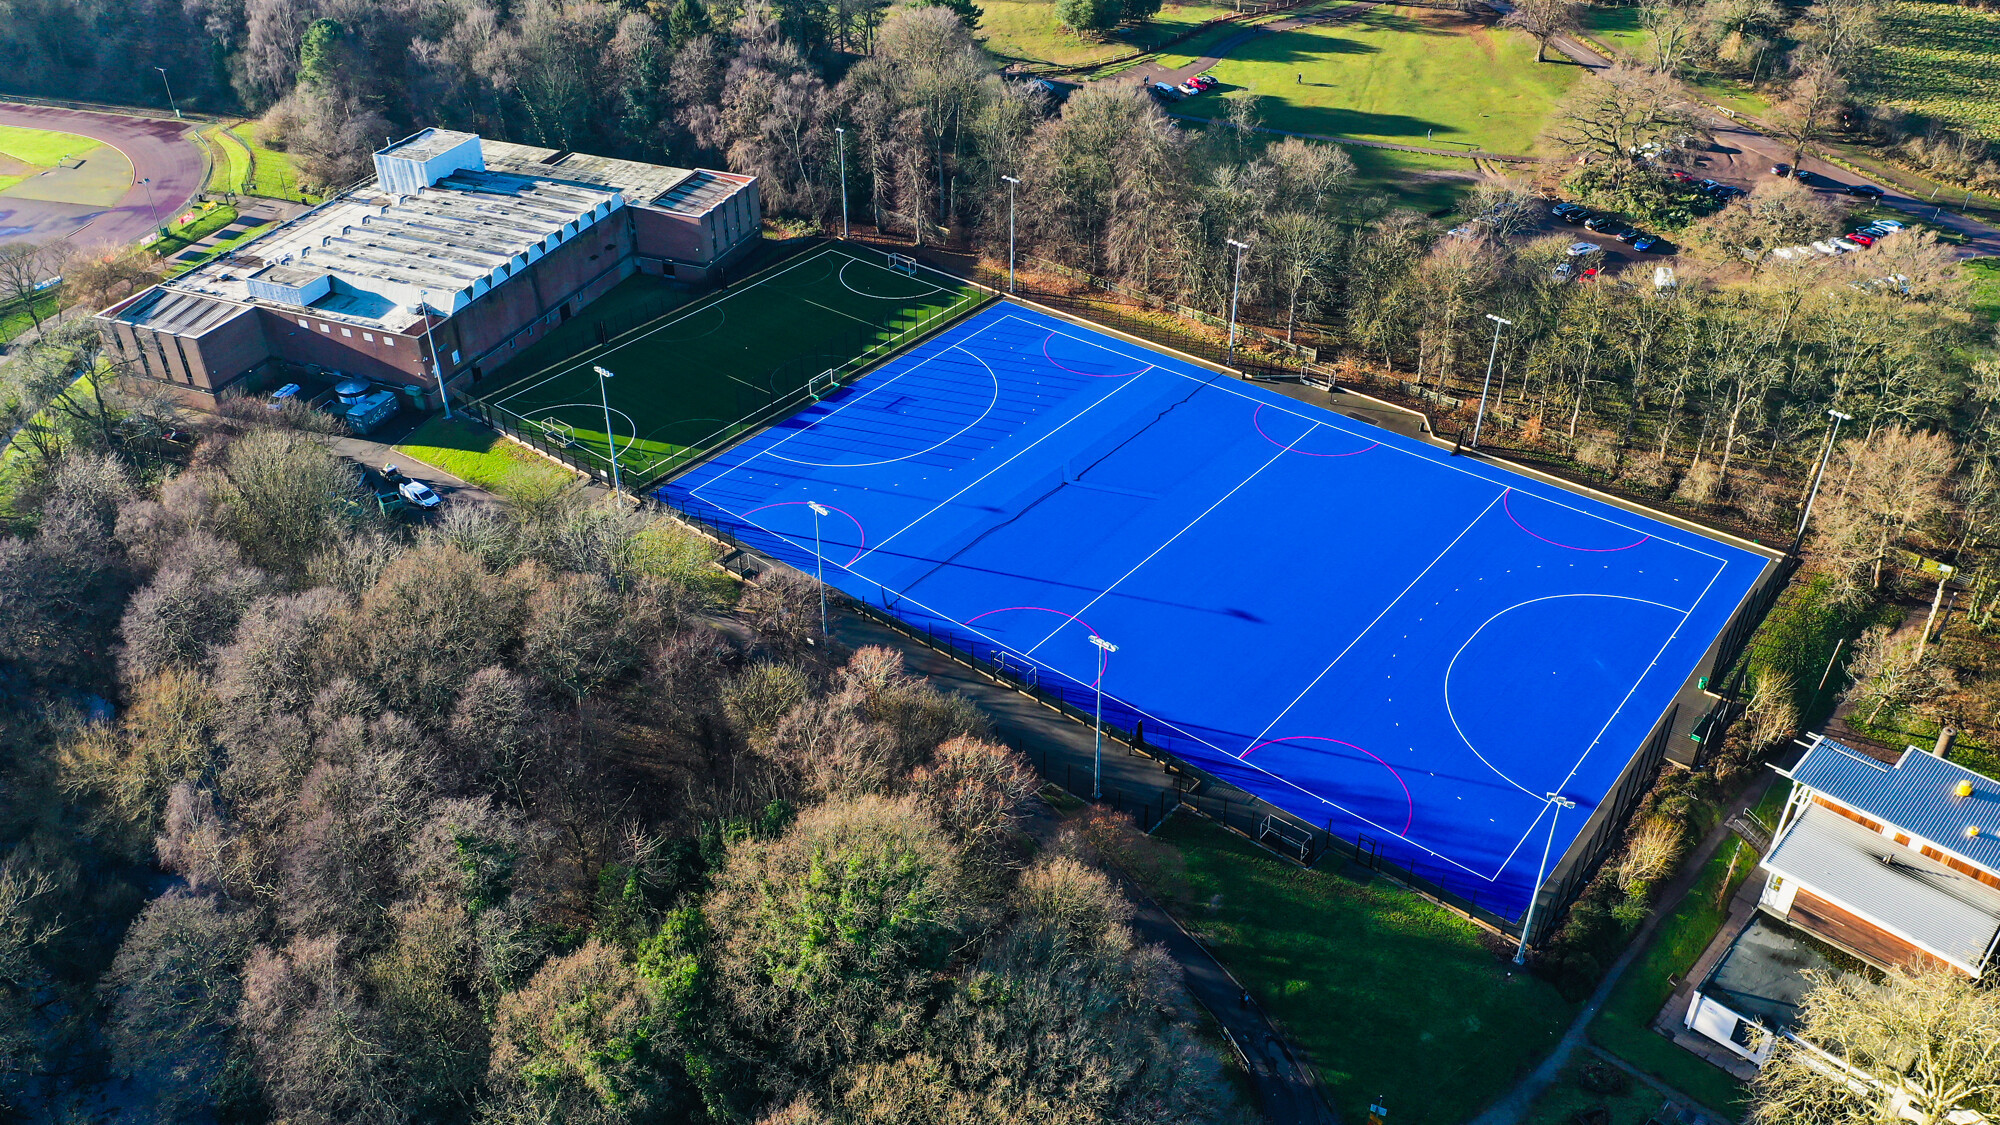 Several sports facilities have been upgraded in advance of Birmingham 2022 ©Birmingham City Council